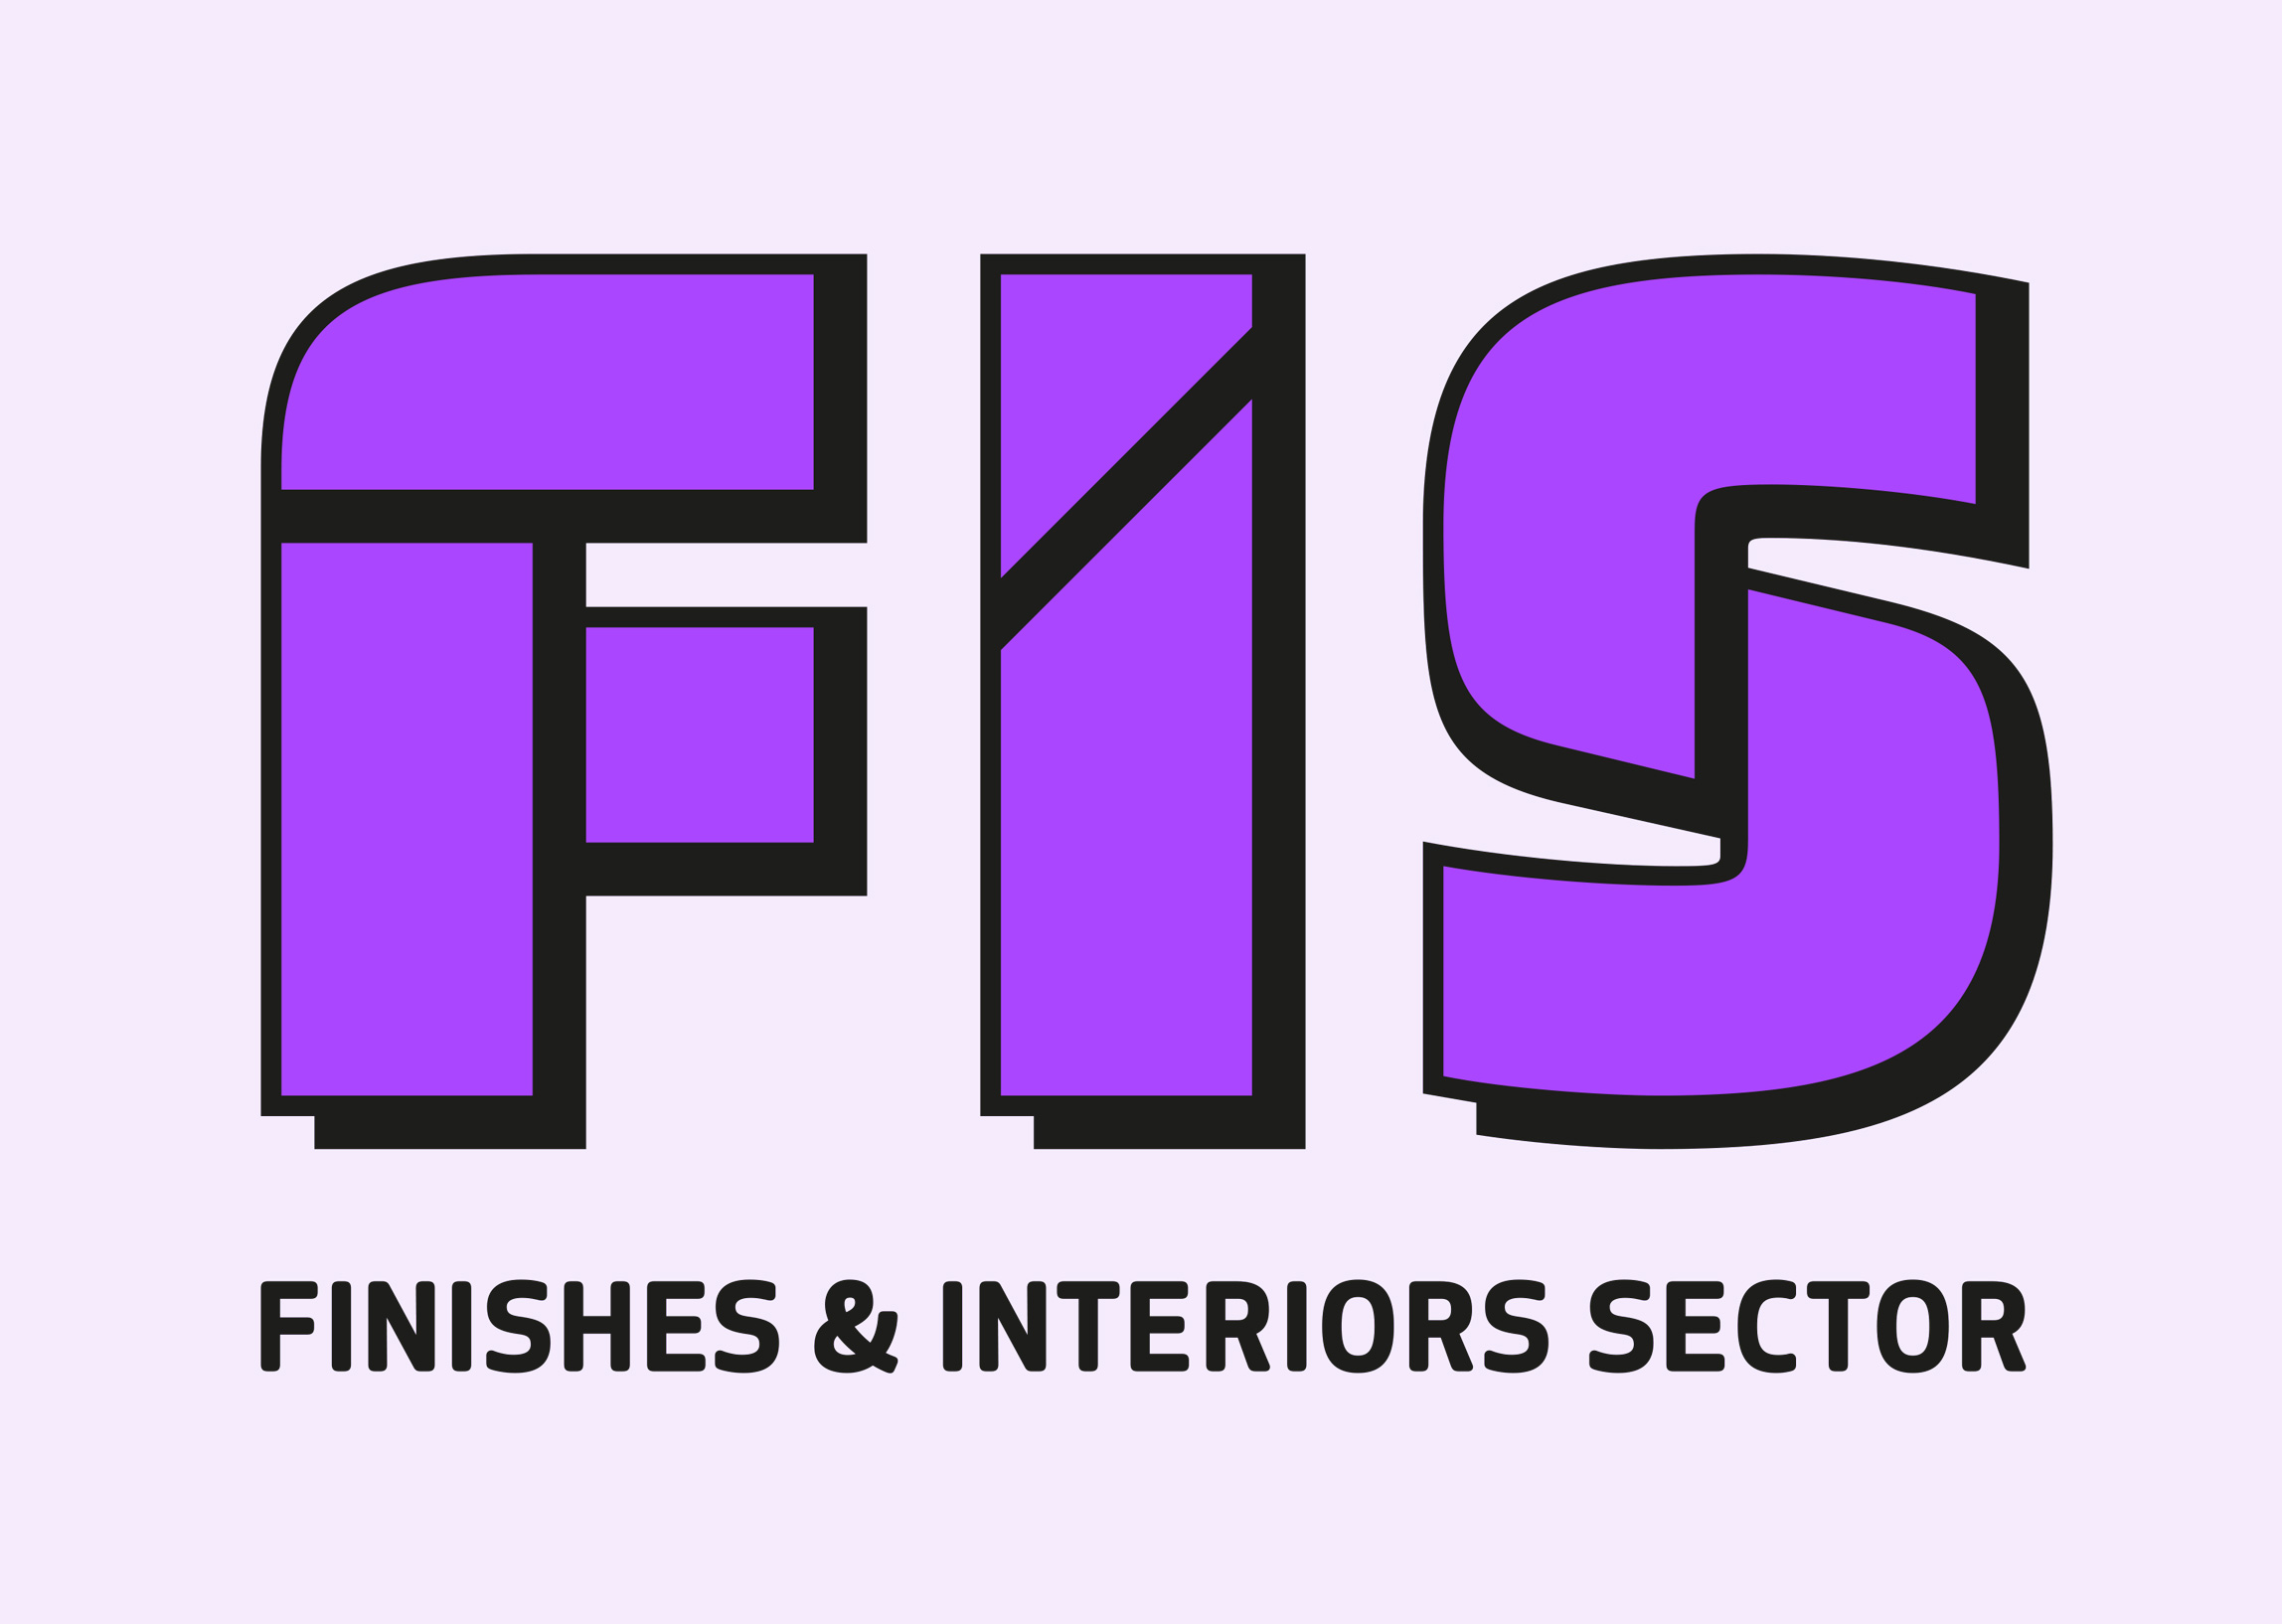 FIS finishes and interiors sector rebrand logo